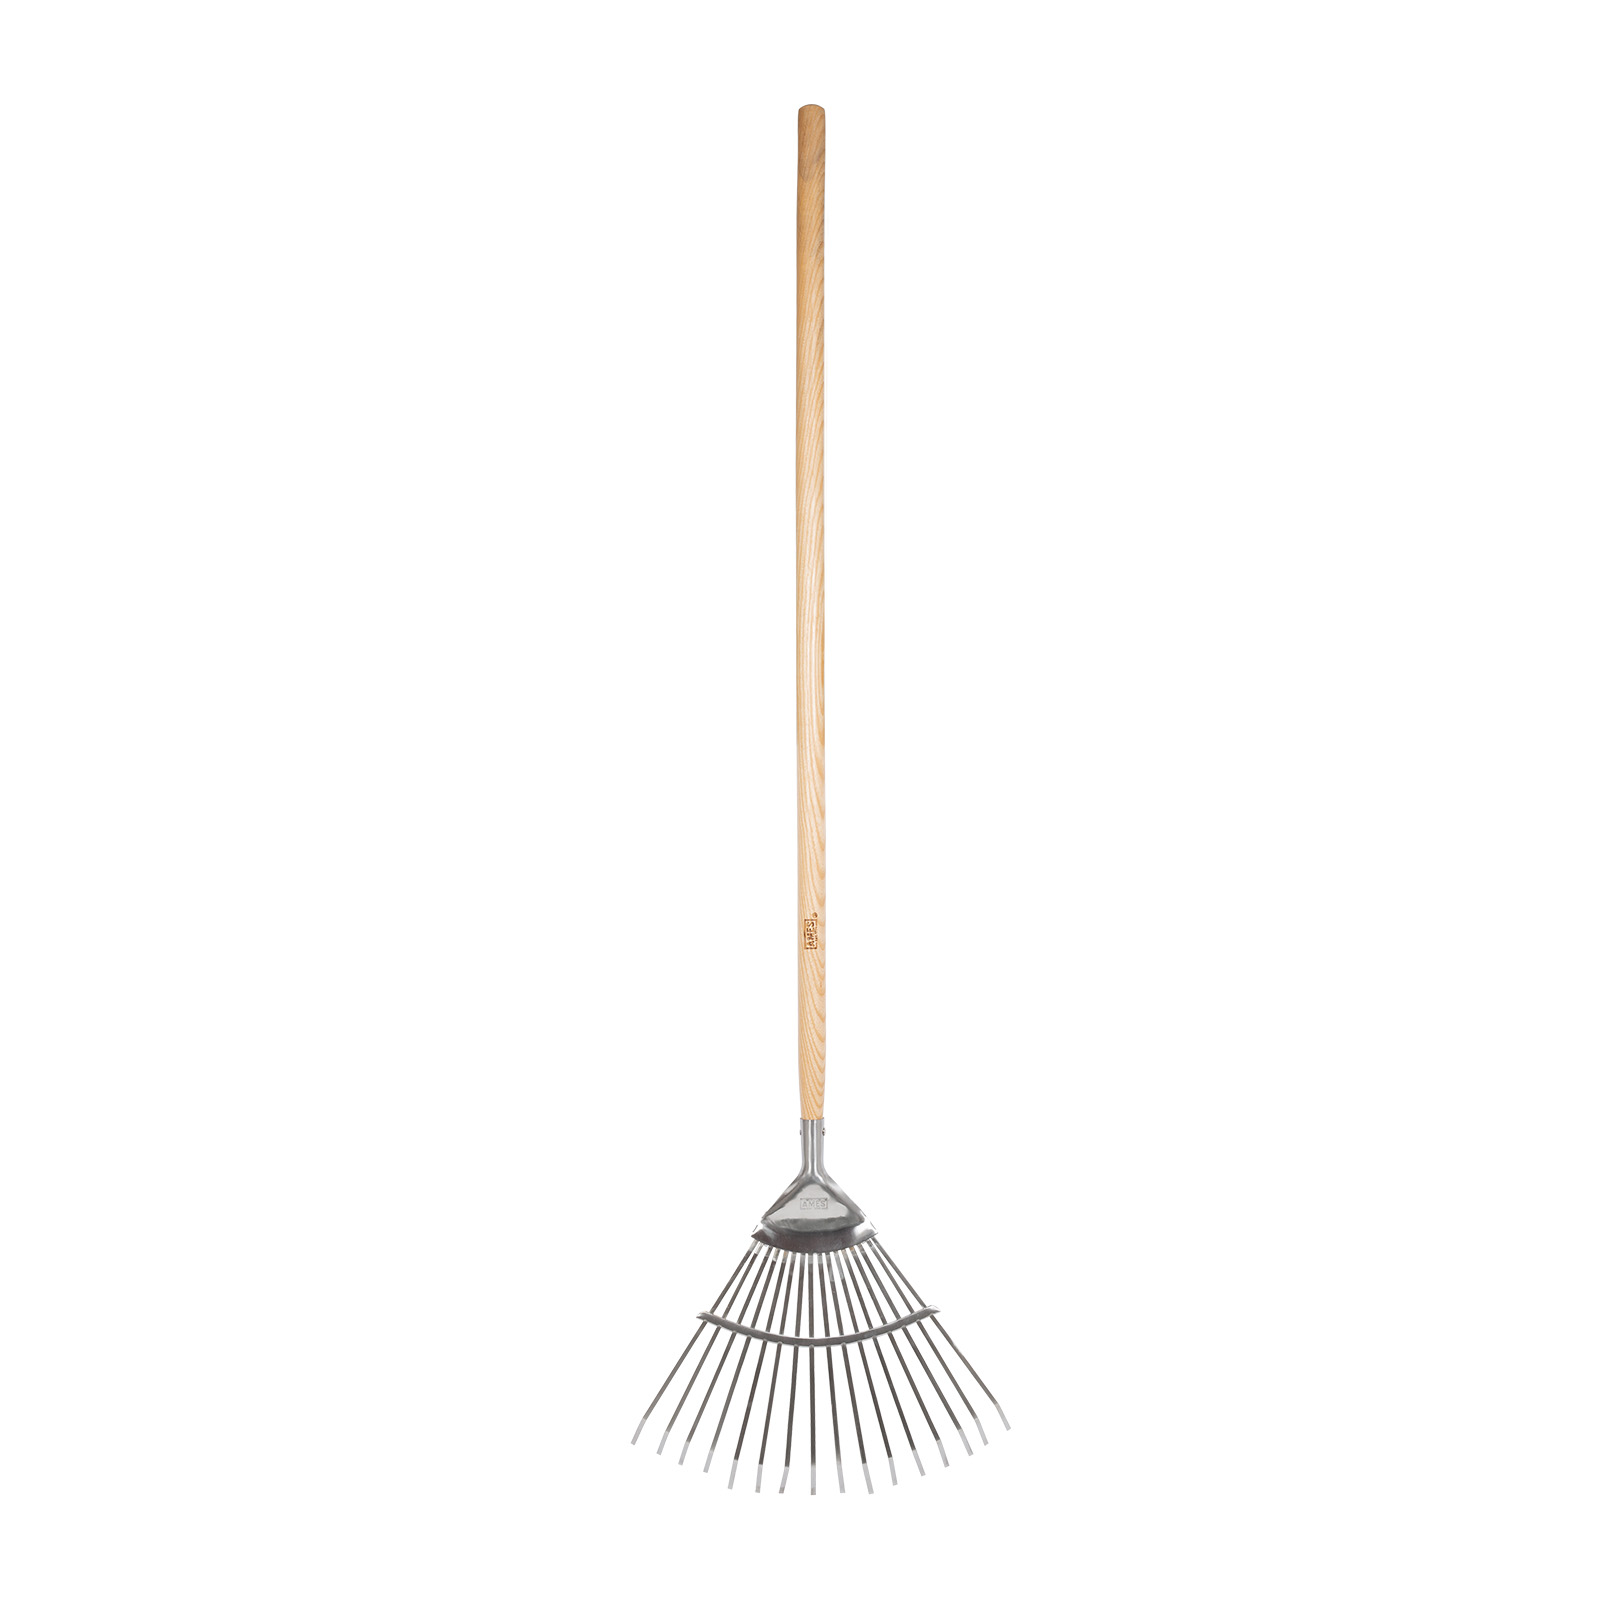 Lawn & Leaf Rake | Lawn Care | Stainless Steel | AMES Tools